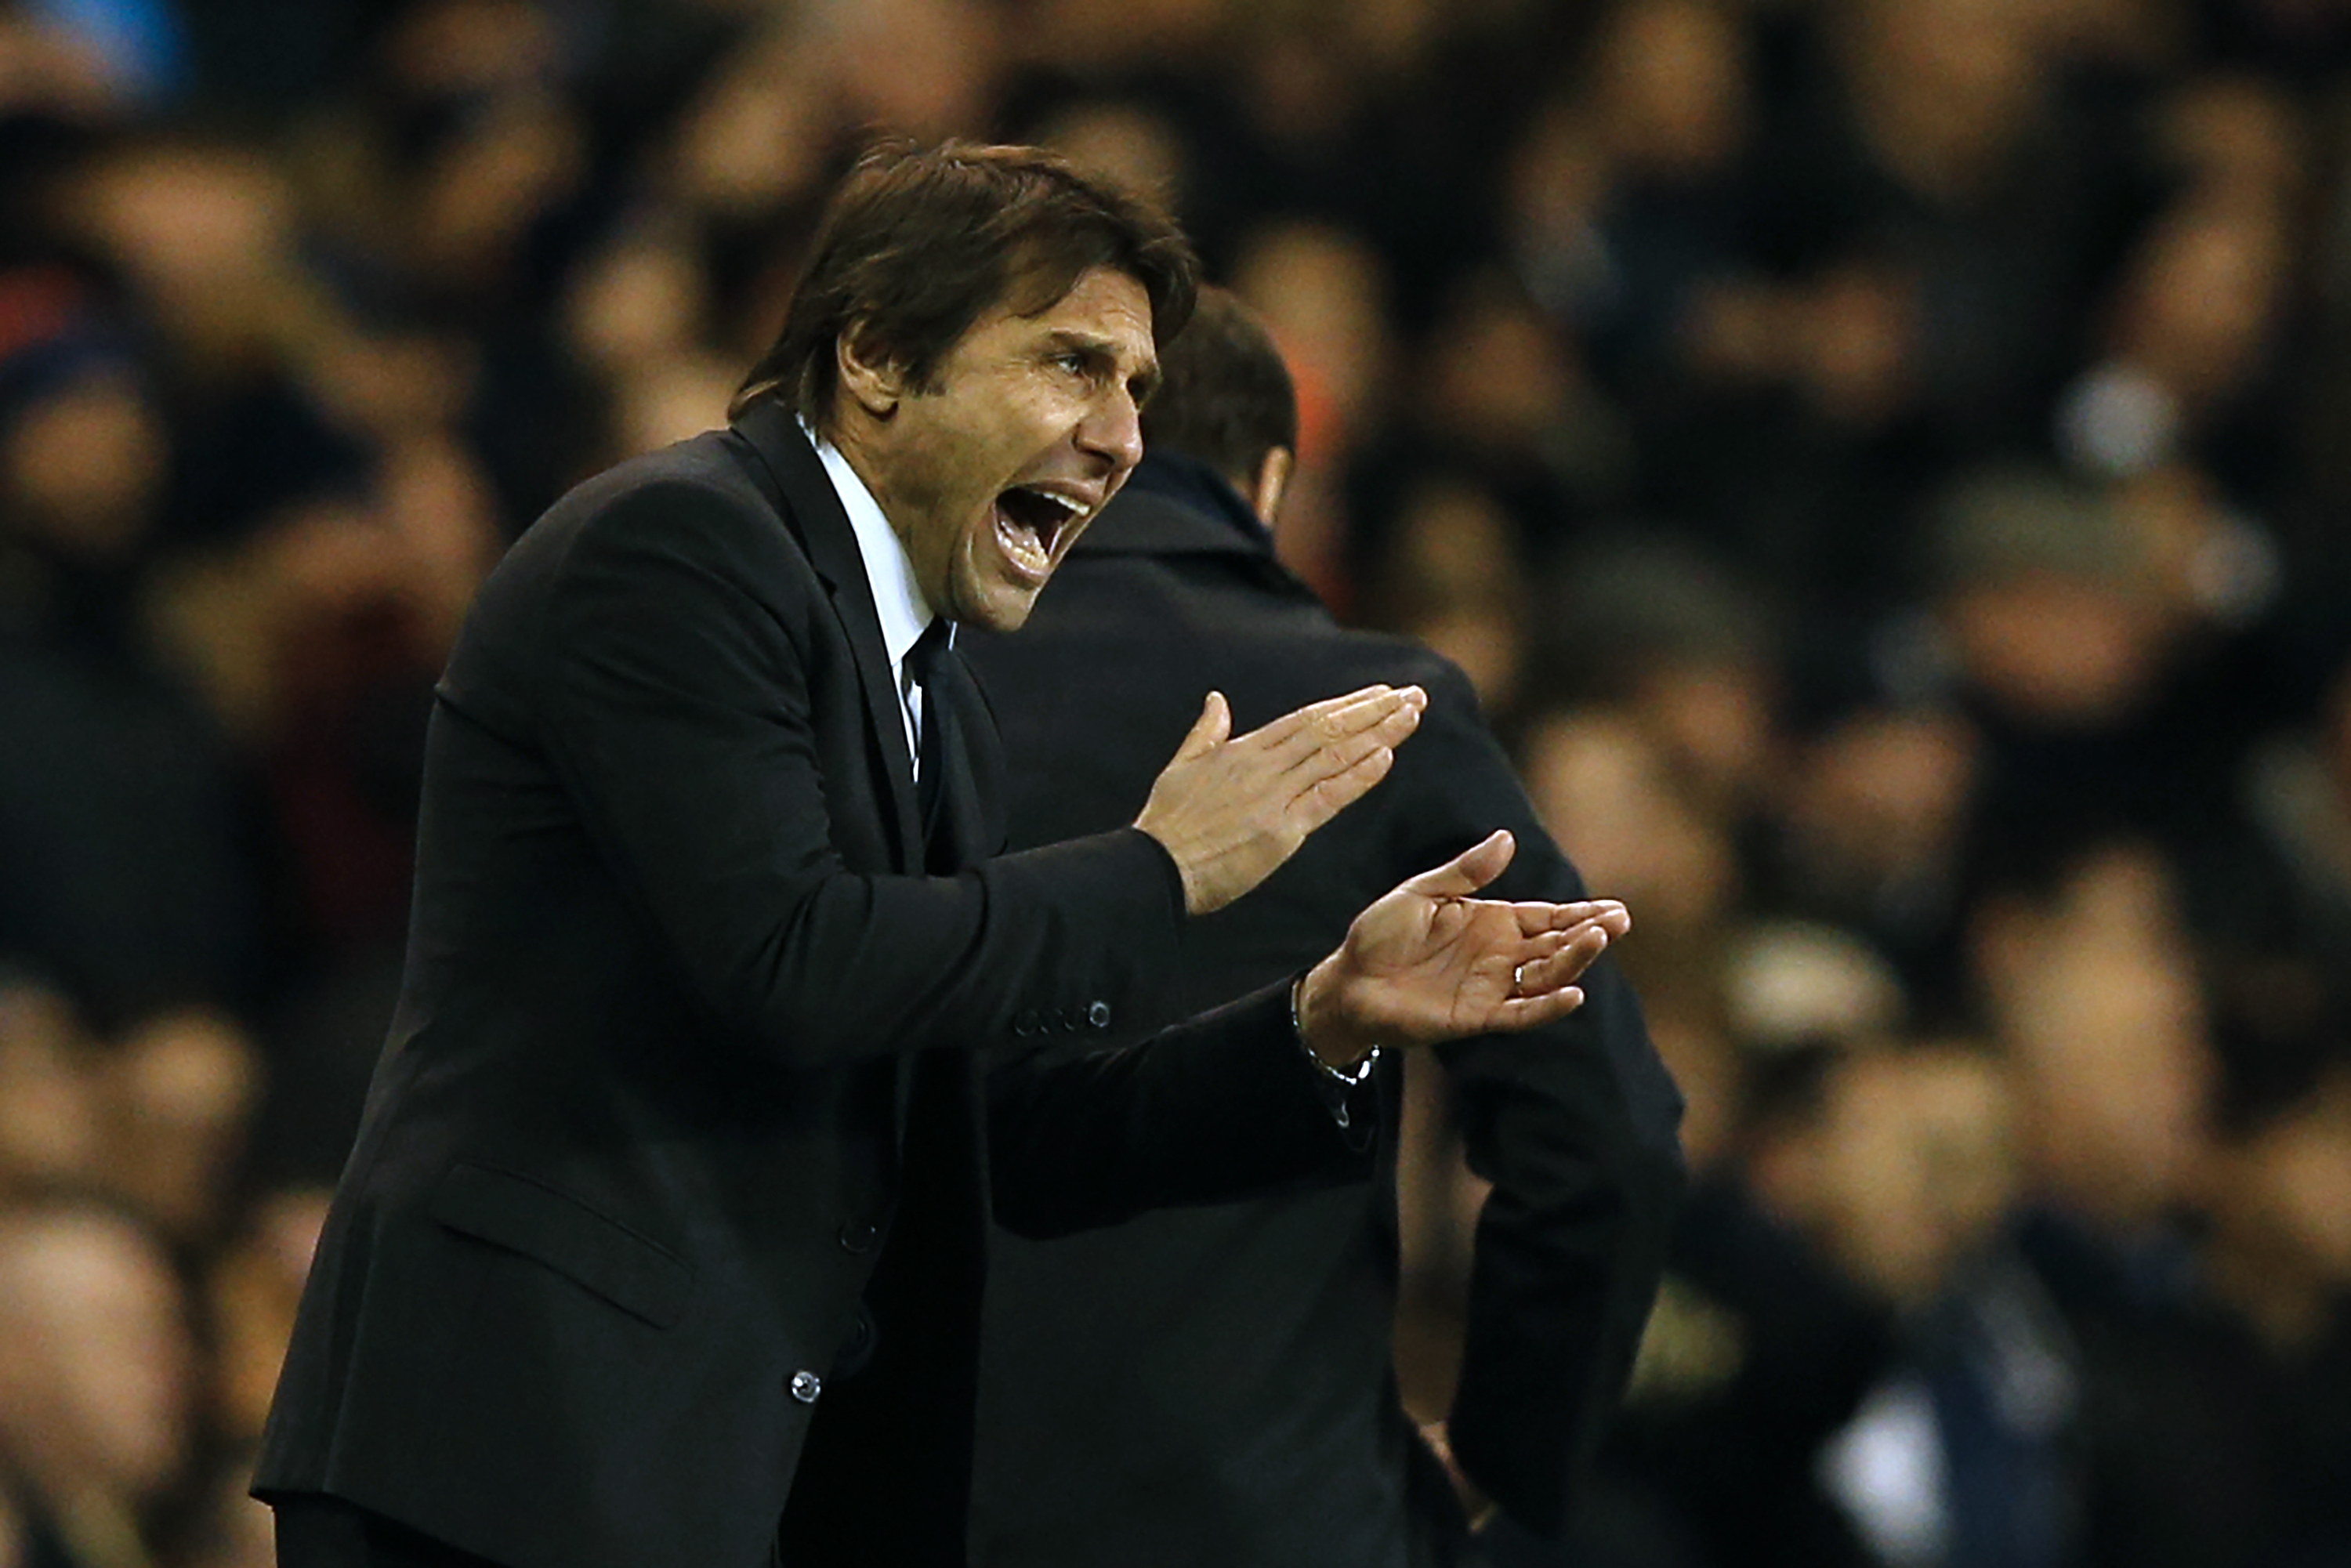 Chelsea's Italian head coach Antonio Conte gestures on the touchline during the English Premier League football match between Tottenham Hotspur and Chelsea at White Hart Lane in London, on January 4, 2017.
In-form midfielder Dele Alli scored two near-identical headers as Tottenham Hotspur beat Chelsea 2-0 on Wednesday to torpedo the Premier League leaders' hopes of a record 14th consecutive victory. (Photo by Adrian Dennis/AFP/Getty Images)